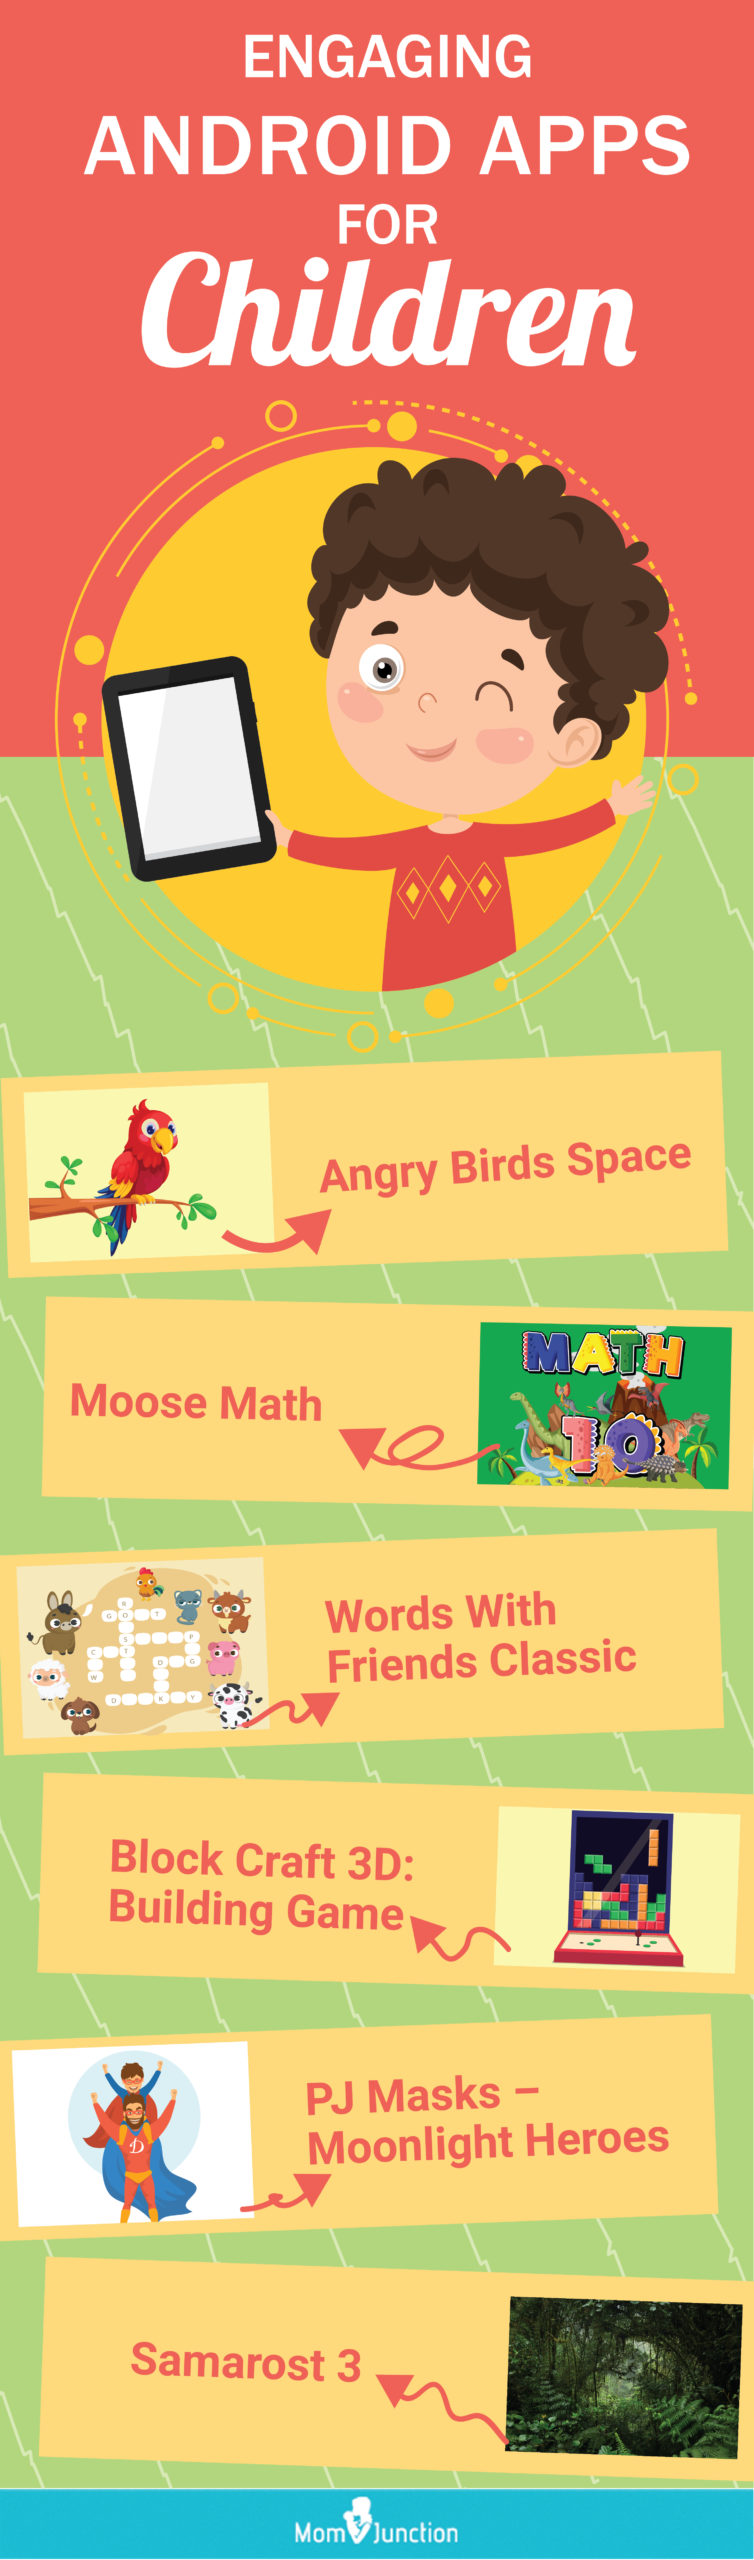 engaging android apps for children (infographic)